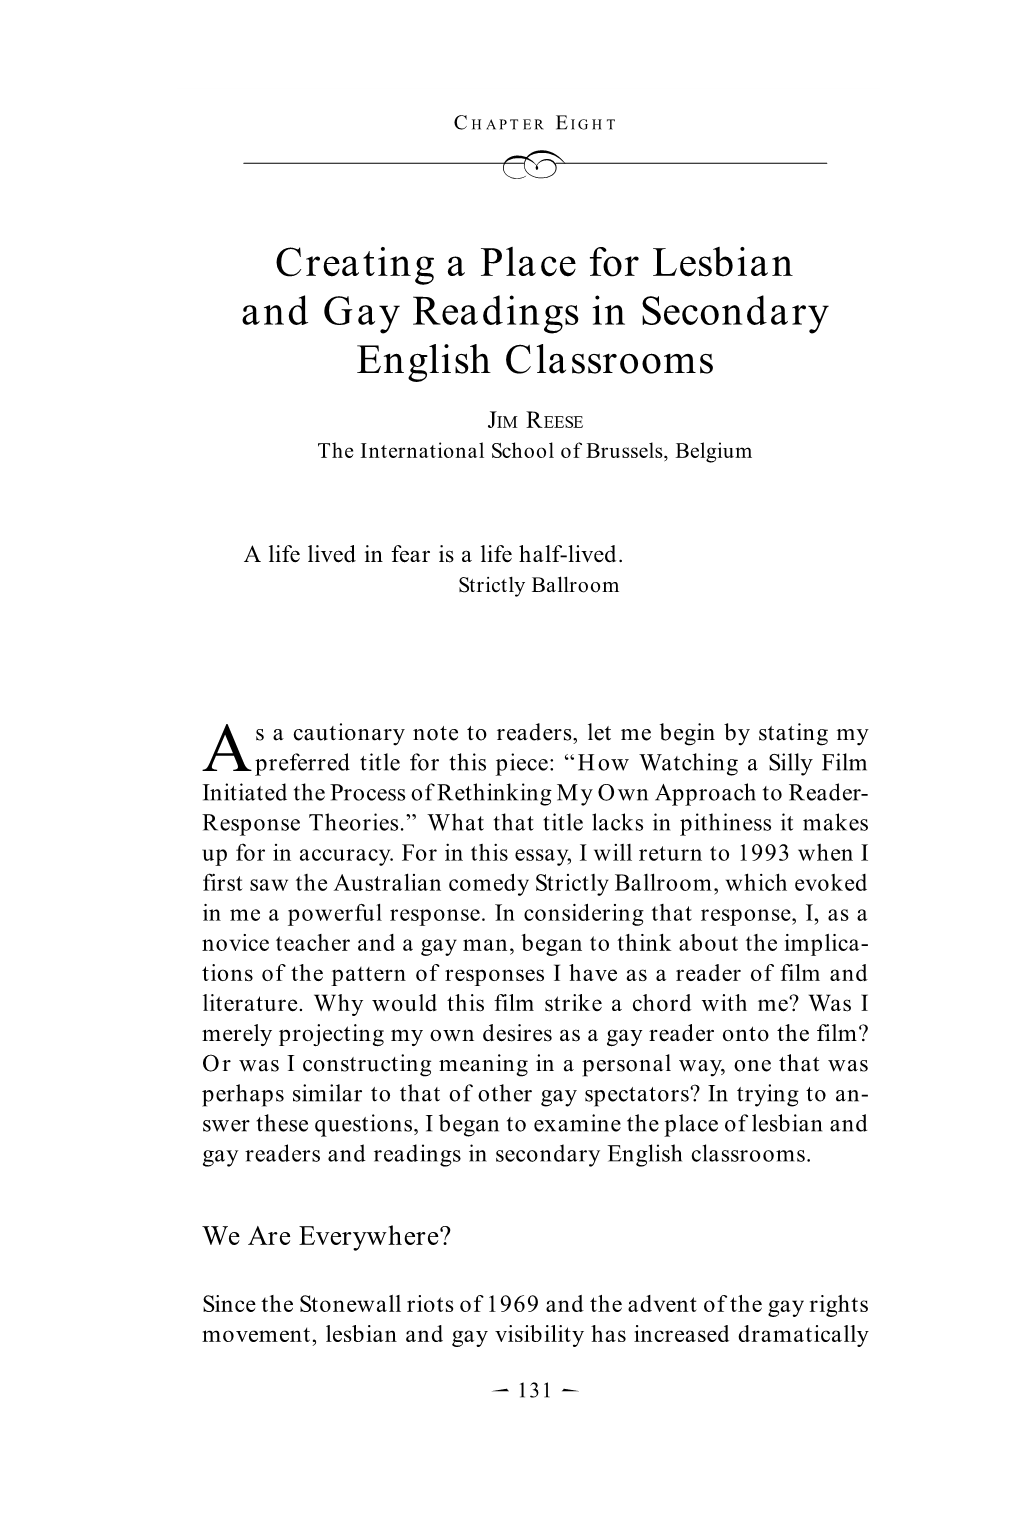 Creating a Place for Lesbian and Gay Readings in Secondary English Classrooms